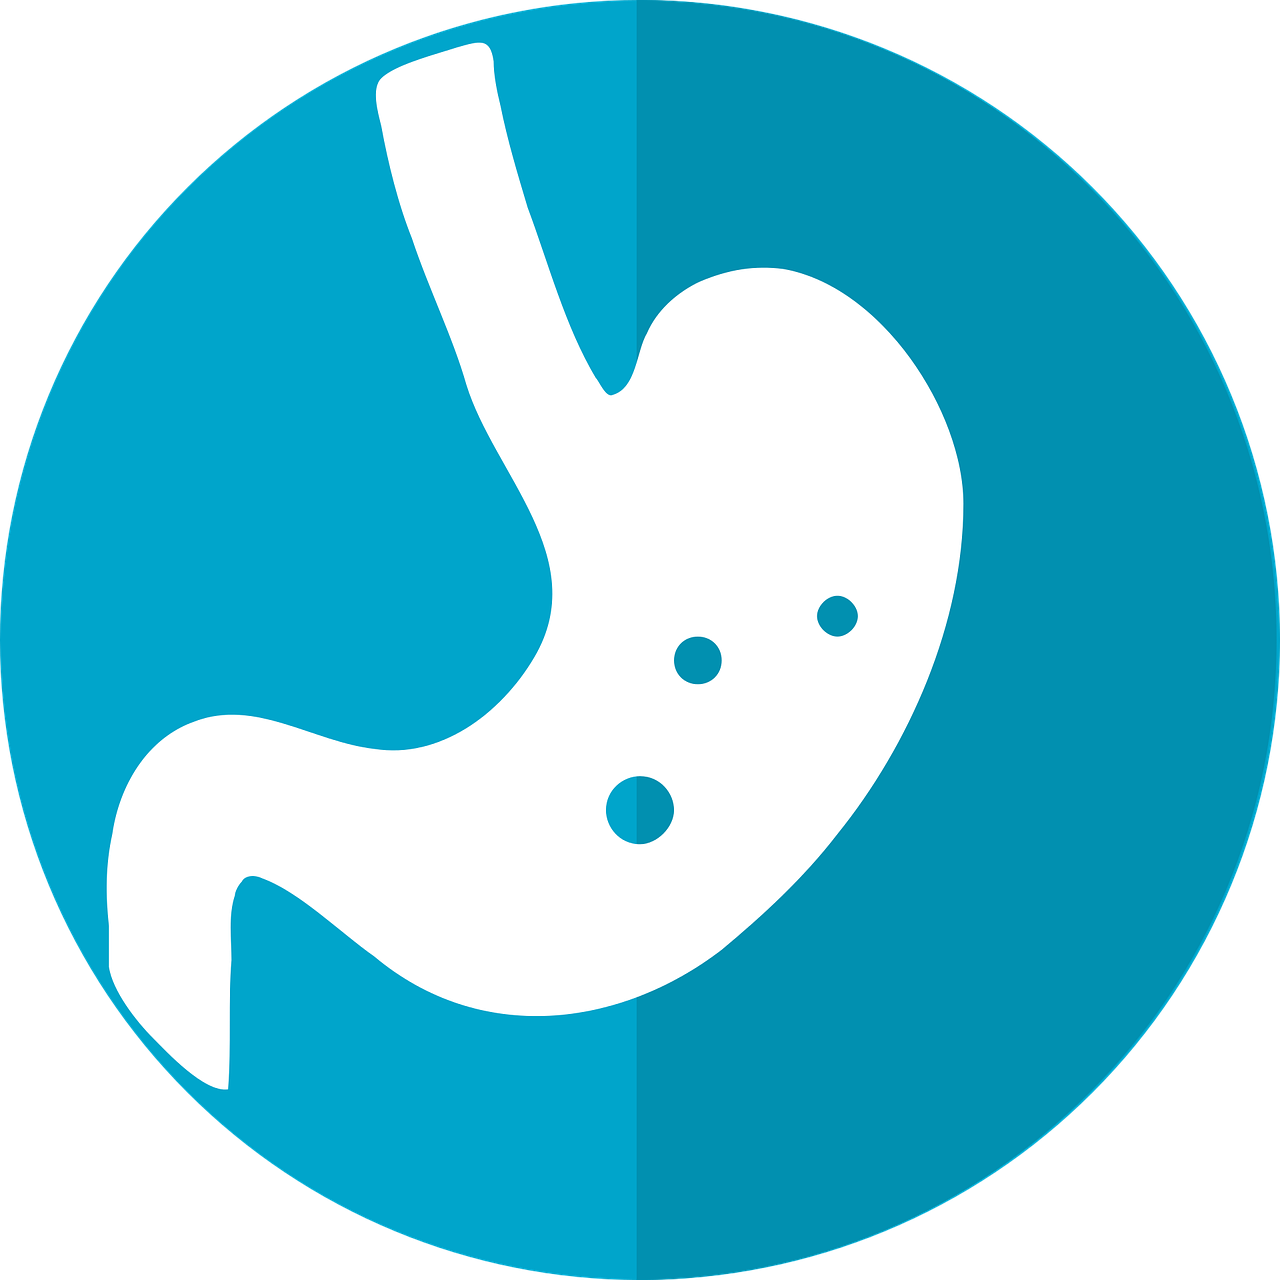 stomach-icon-2316627_1280-1280x1280.png